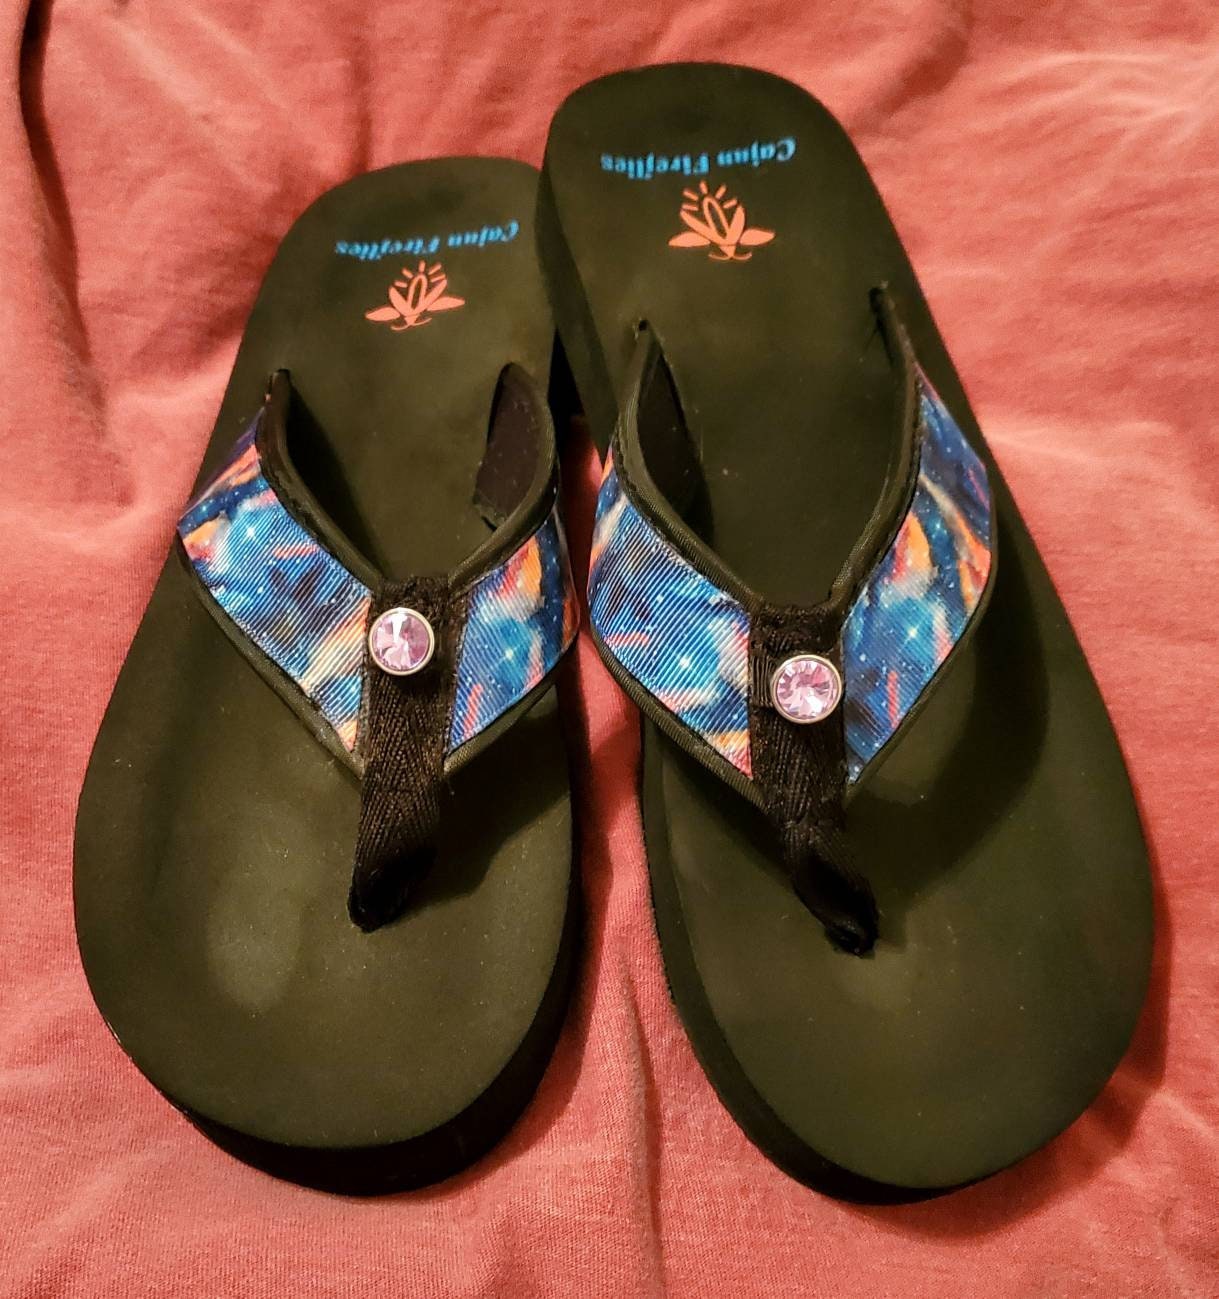 Galaxy Flip Flops Sandals Sizes Small 4/5 Med. 6/7 | Etsy